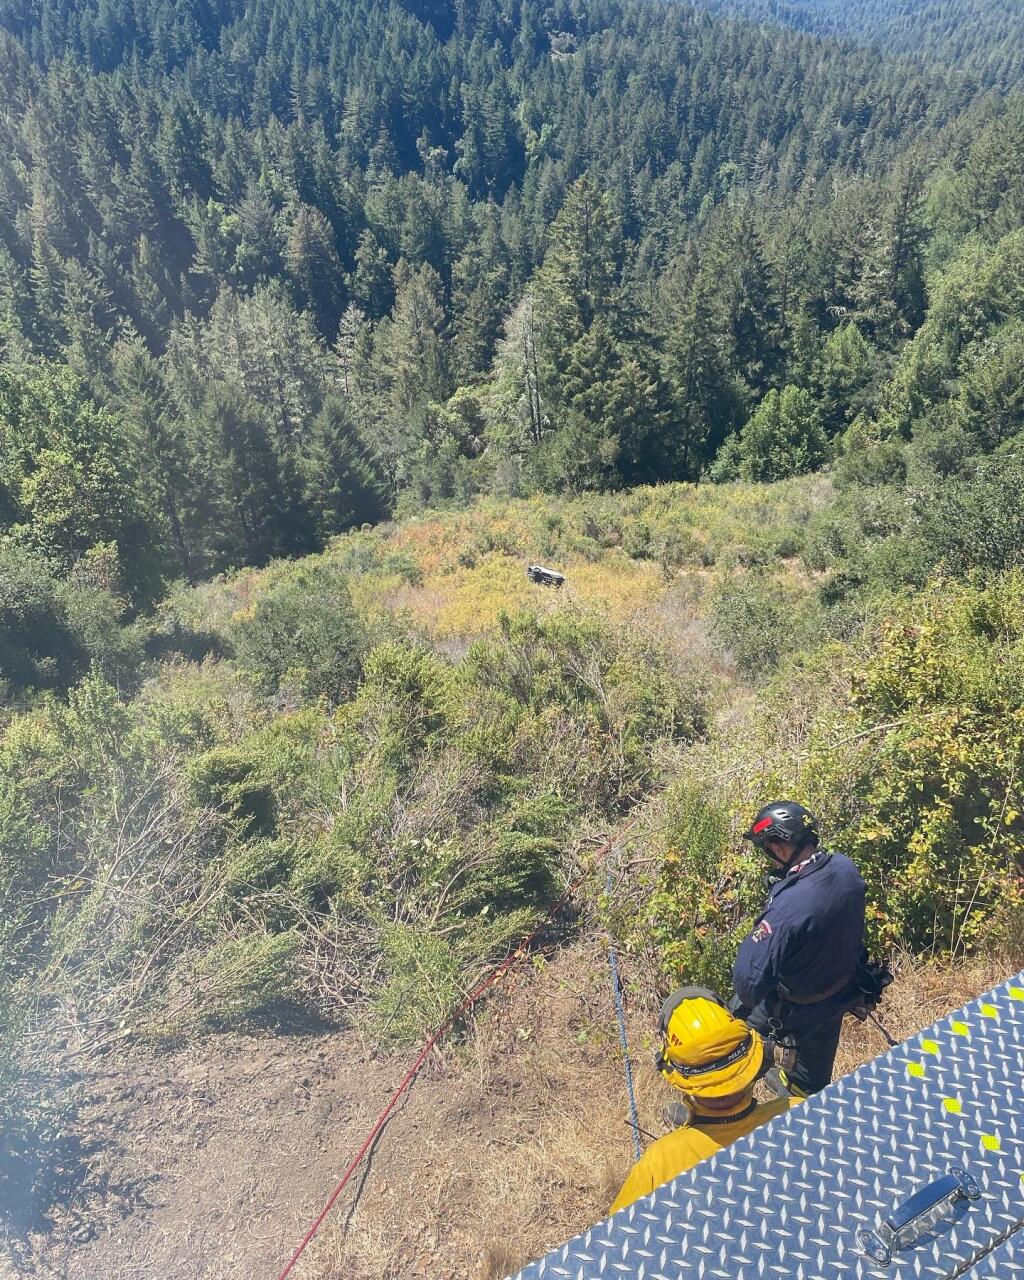 A Bay Area man was rescued Tuesday, Aug. 23, 2022 next to the overturned Land Rover that he drove over a cliff on the back roads of La Honda, the California Highway Patrol said. (Cal Fire CZU)